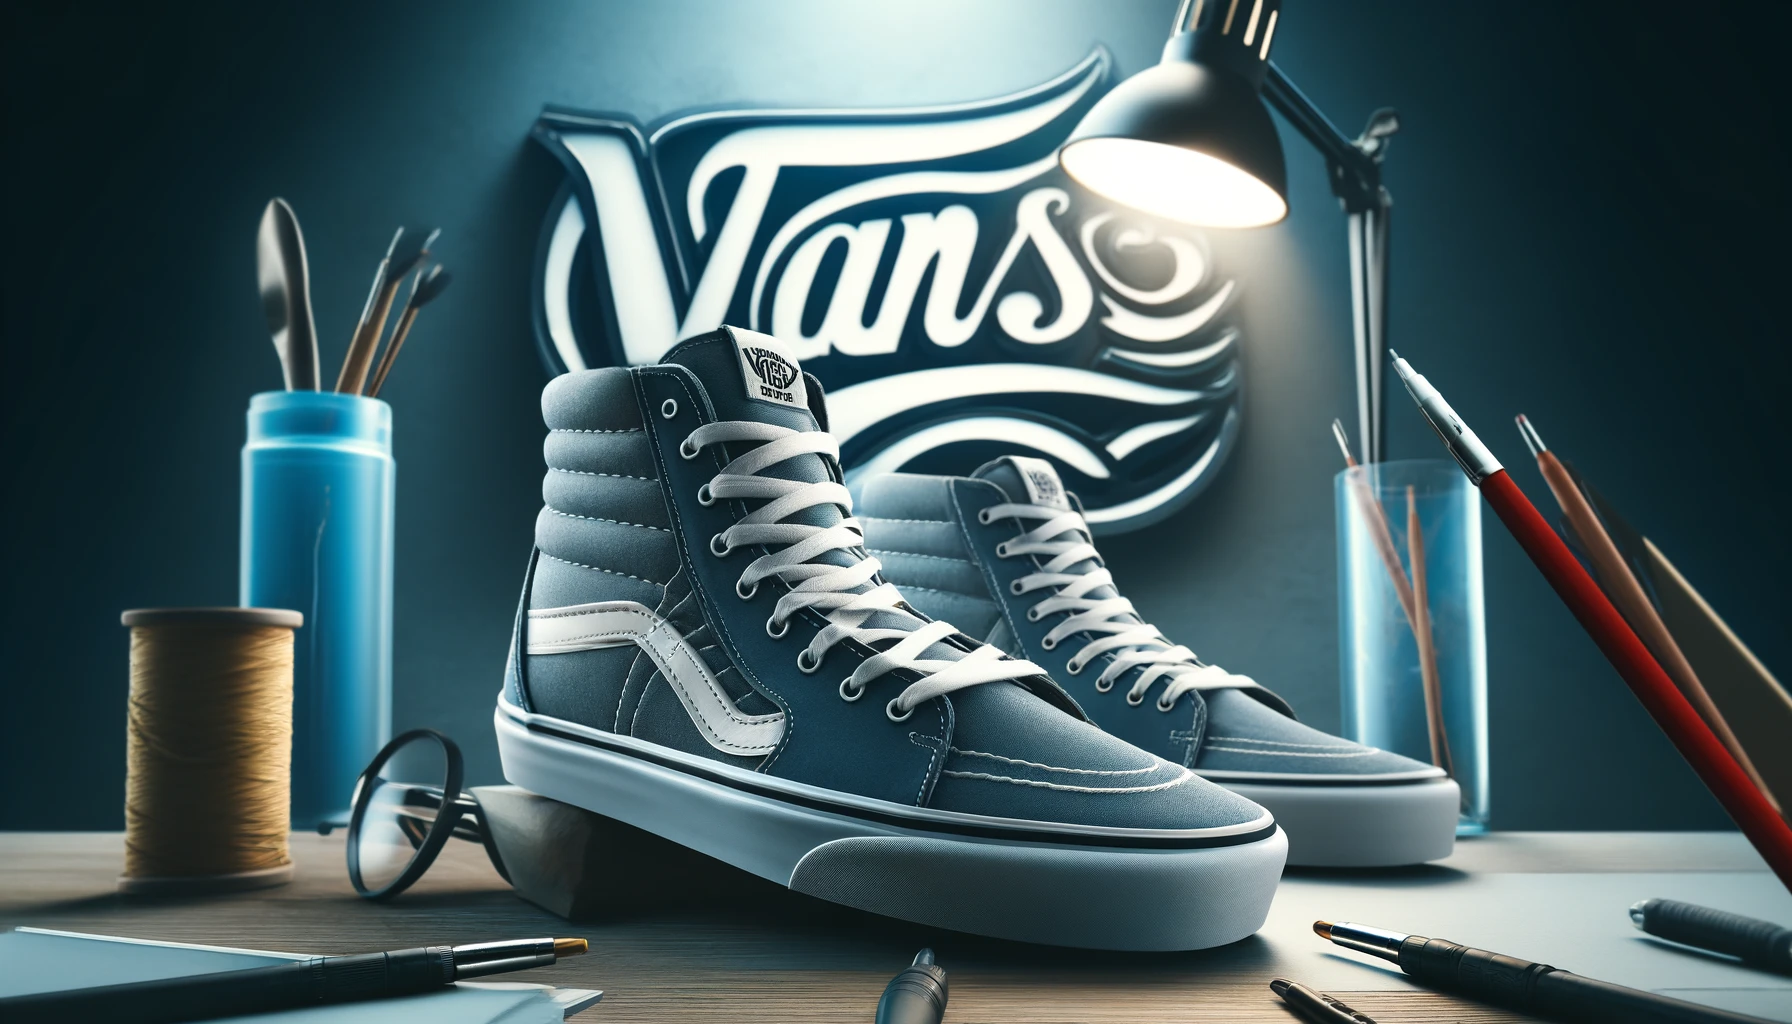 An image showcasing VANS high-top sneakers on display with a stylish background, featuring the text 'VANS' prominently.